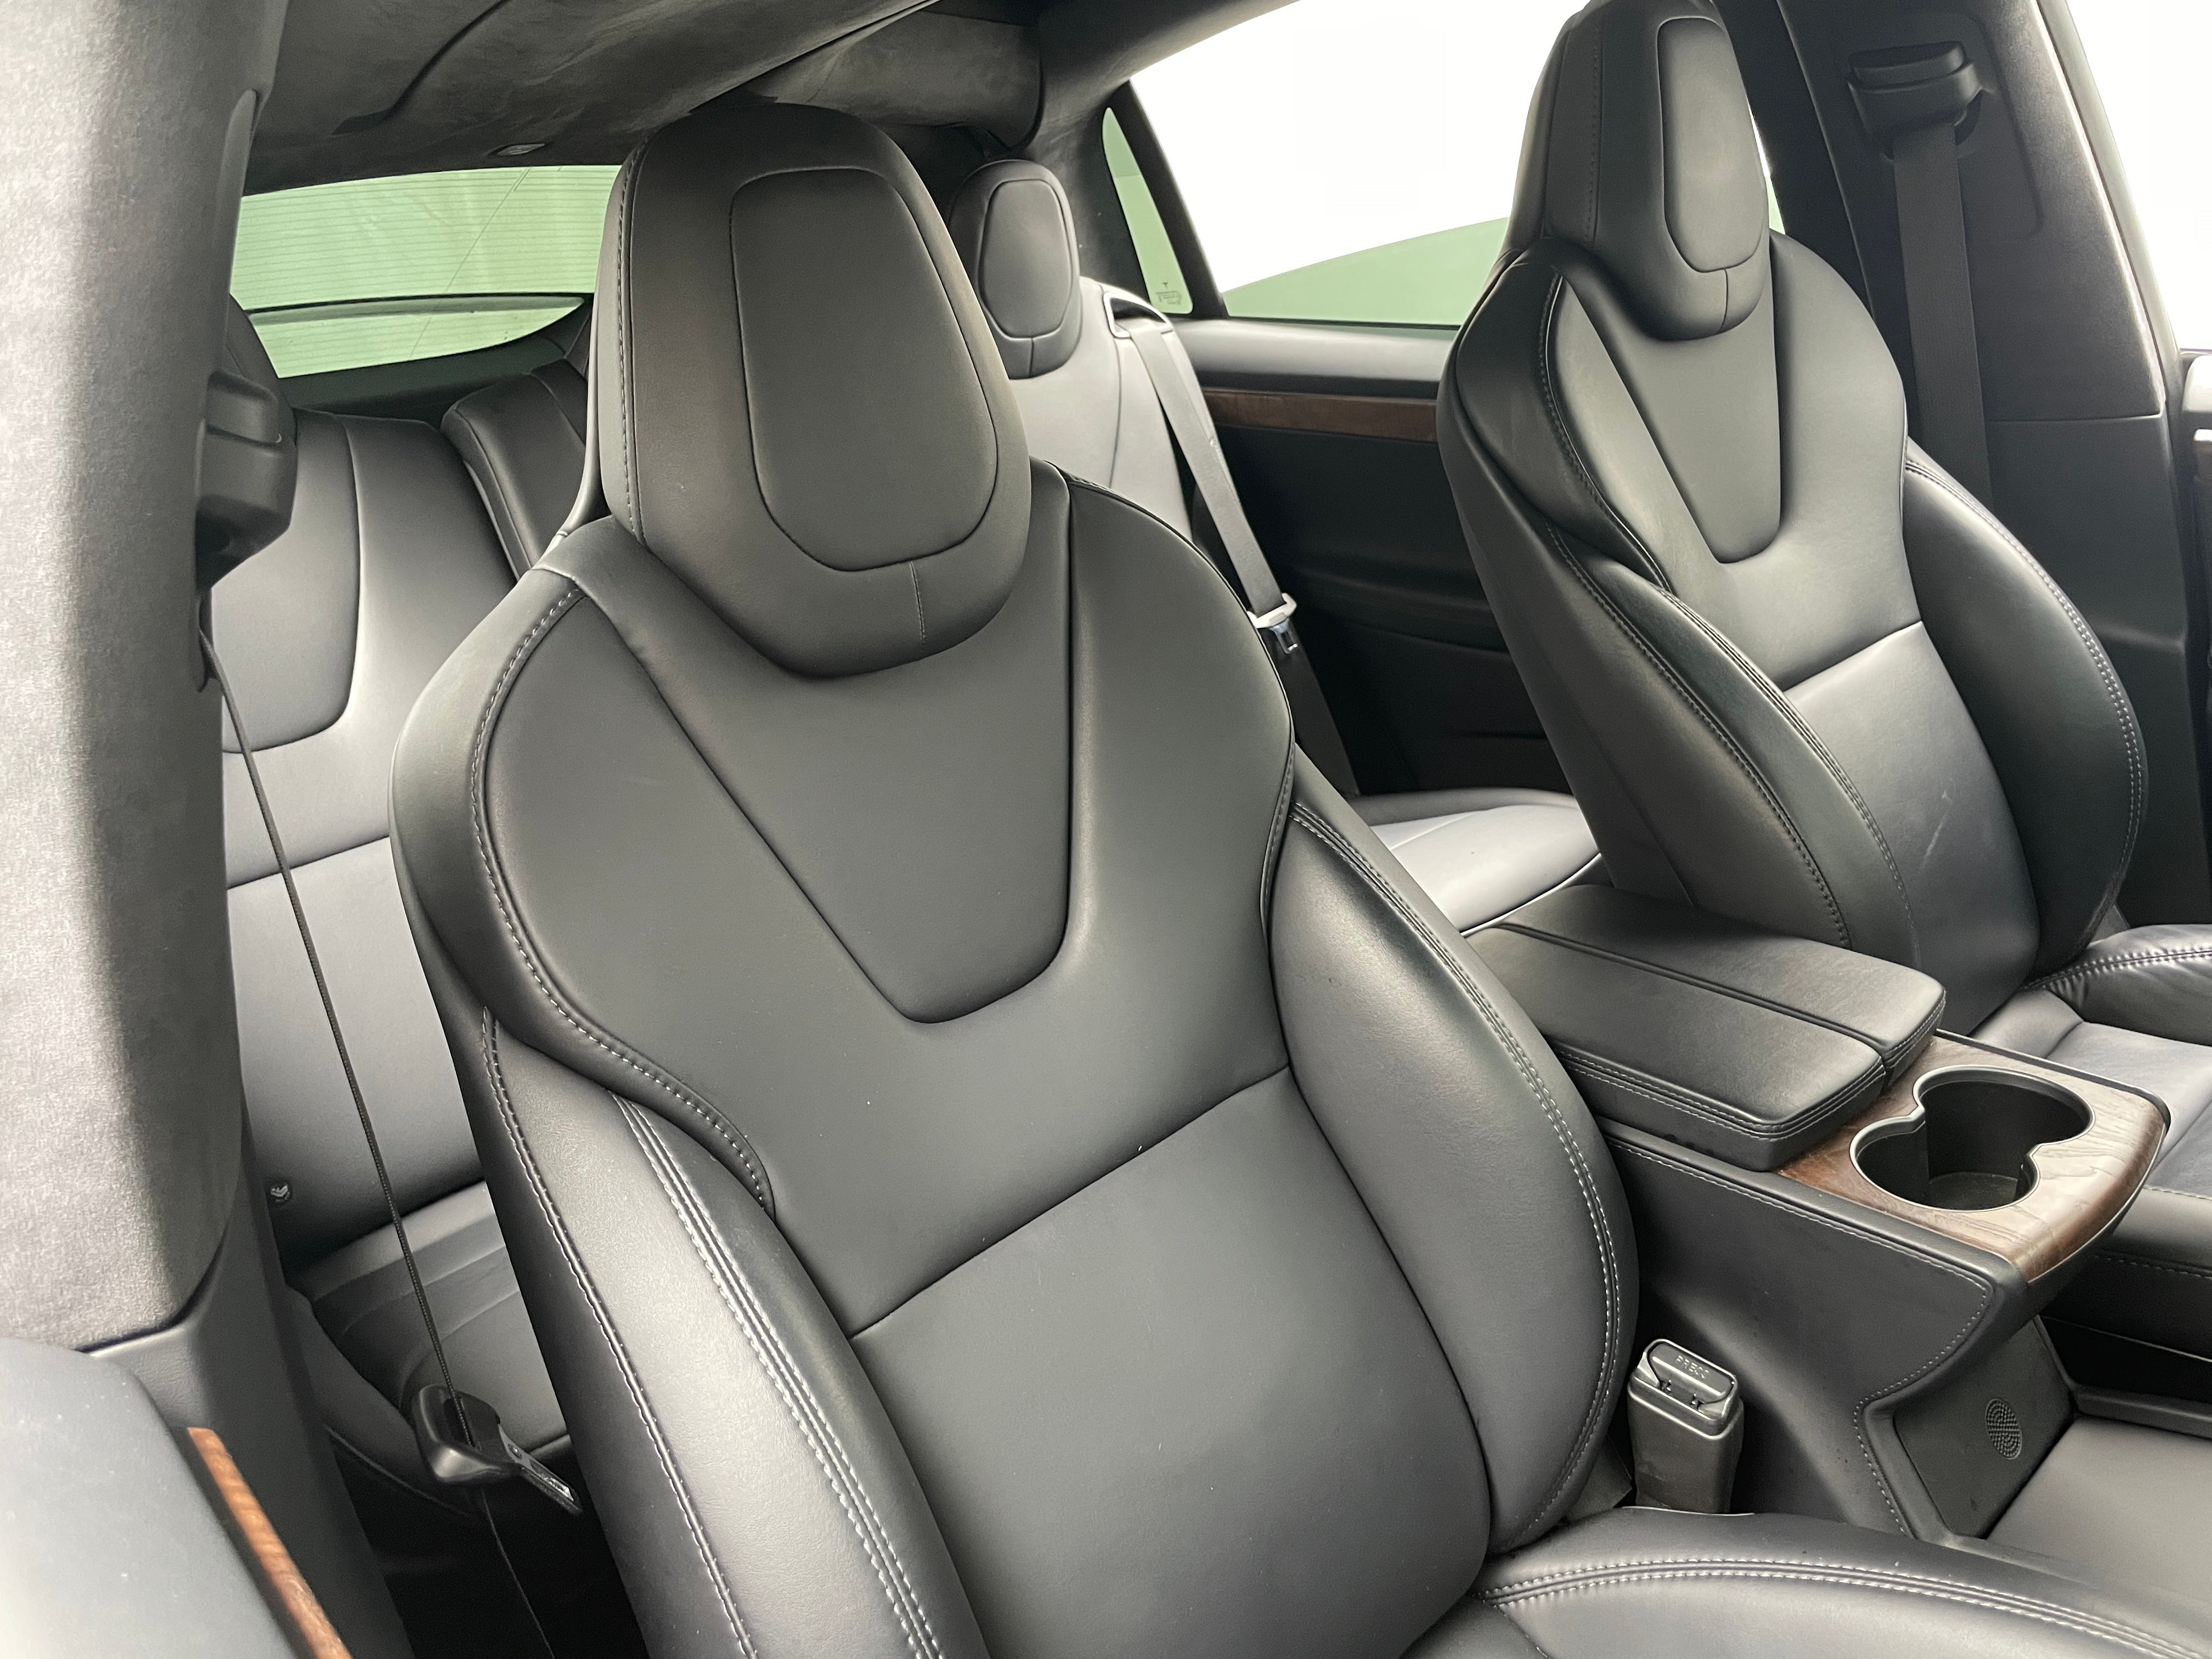 Used 2019 Tesla Model X Long Range with VIN 5YJXCDE21KF181993 for sale in South Chesterfield, VA